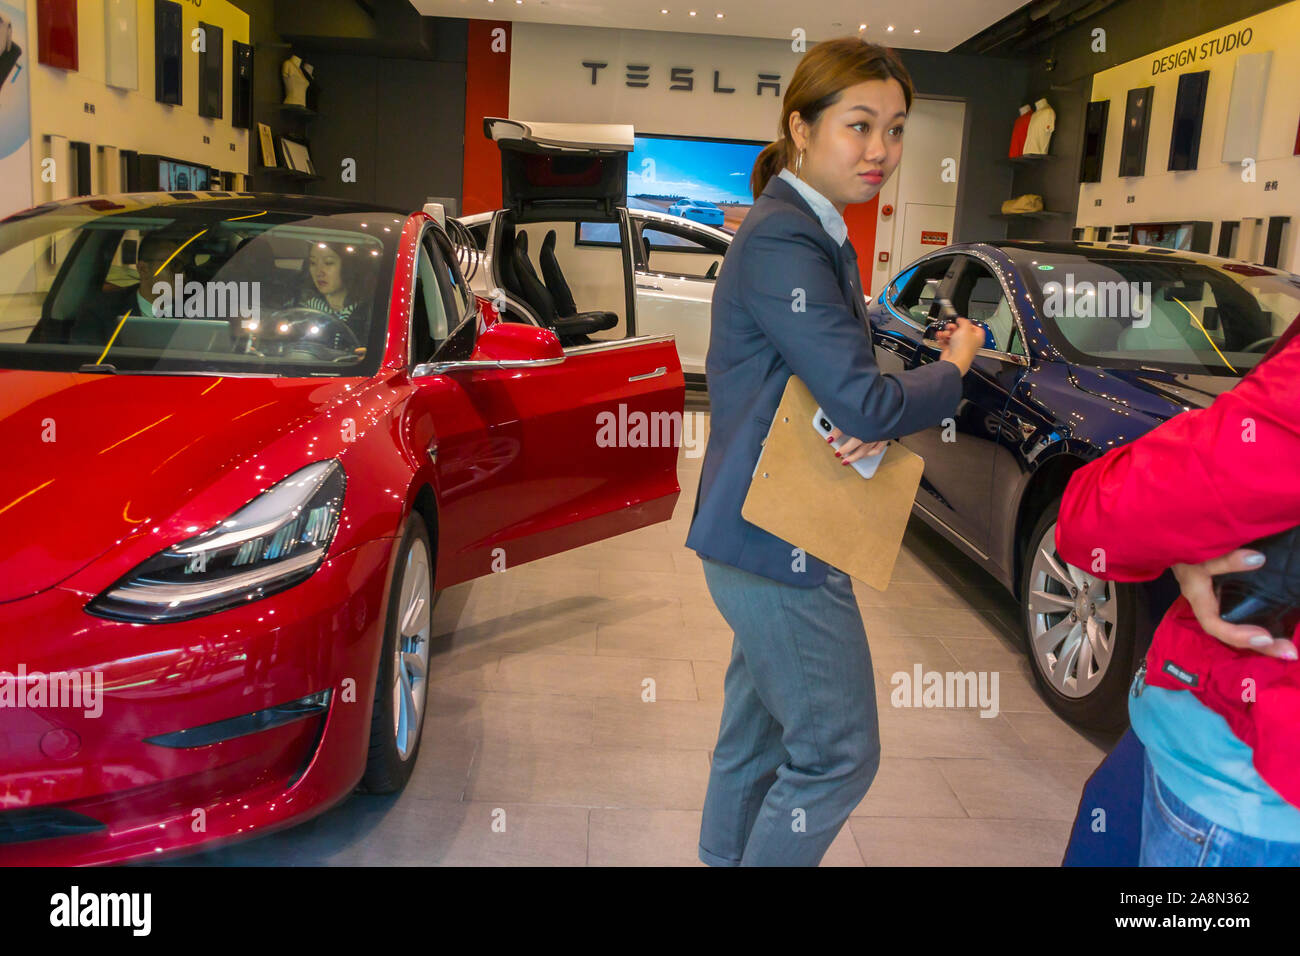 Shanghai, Cina, donna che presenta, Rich Luxury Chinese Electric Car Showroom, marchio Tesla, assistente boutique, giovane donna cinese, capitalismo cinese Foto Stock